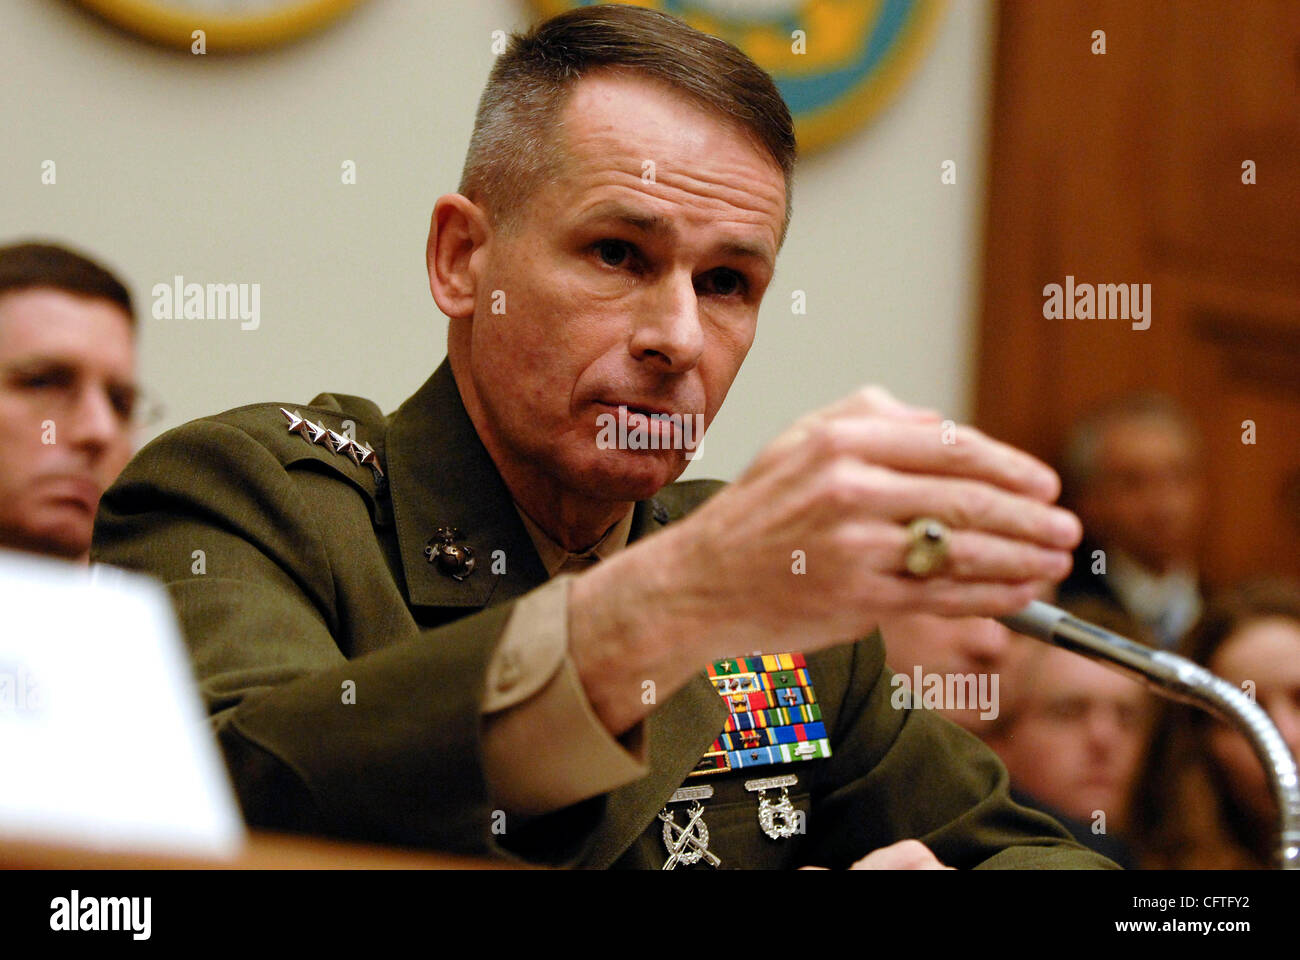 Jan 11, 2007; Washington, DC, USA; General PETER PACE answers questions from the House Armed Services Committee about President Bush's plan to send over 21,000 more troops to Iraq. Mandatory Credit: Photo by Mark Murrmann/ZUMA Press. (©) Copyright 2007 by Mark Murrmann Stock Photo